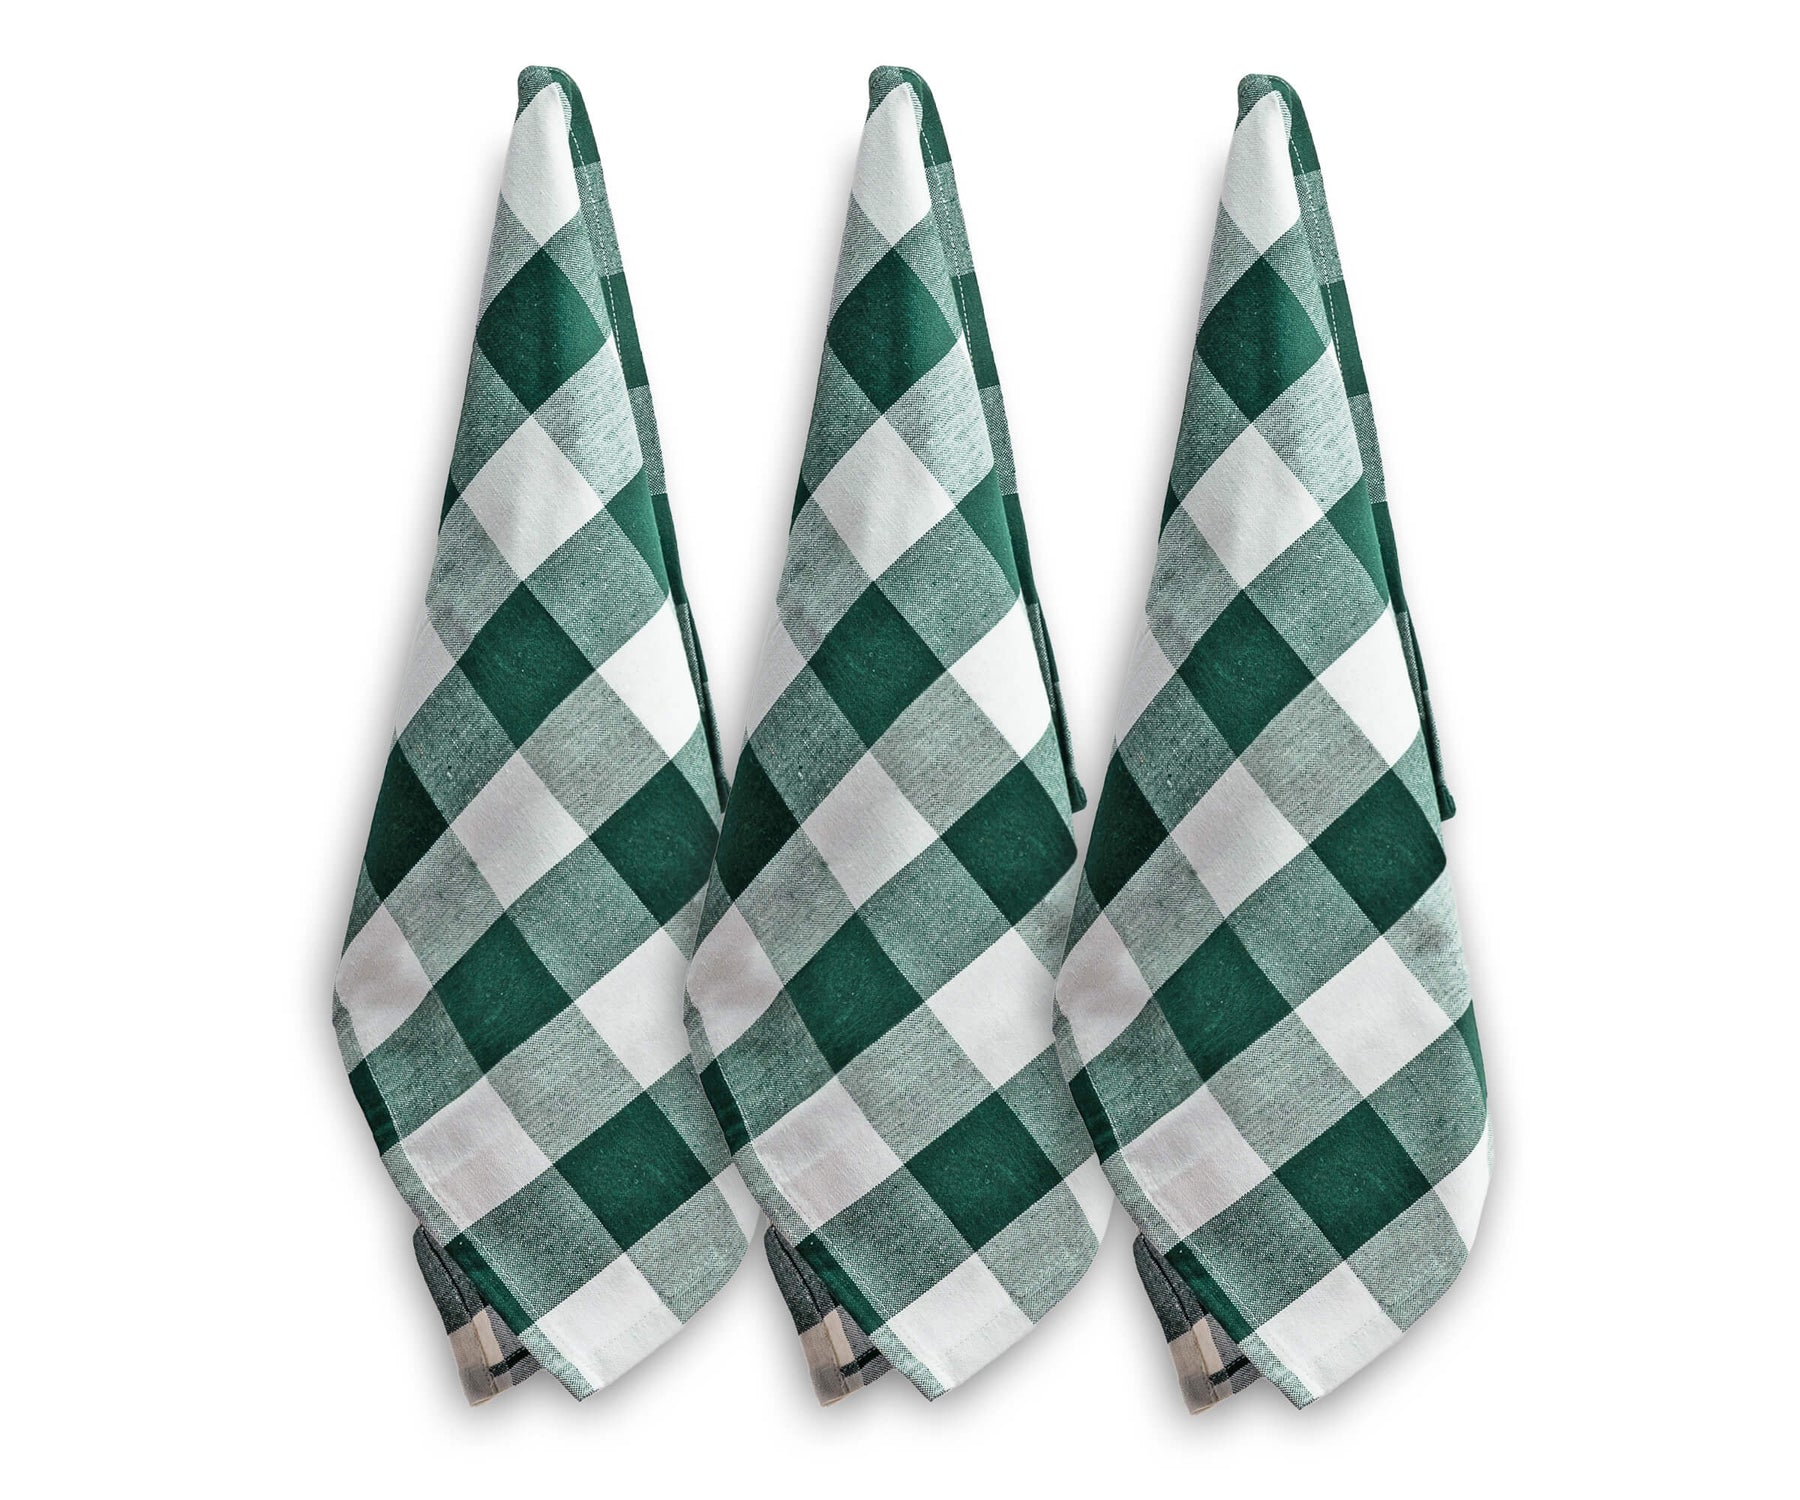 Green and white towels are a classic combination that is perfect for kitchens of all styles.